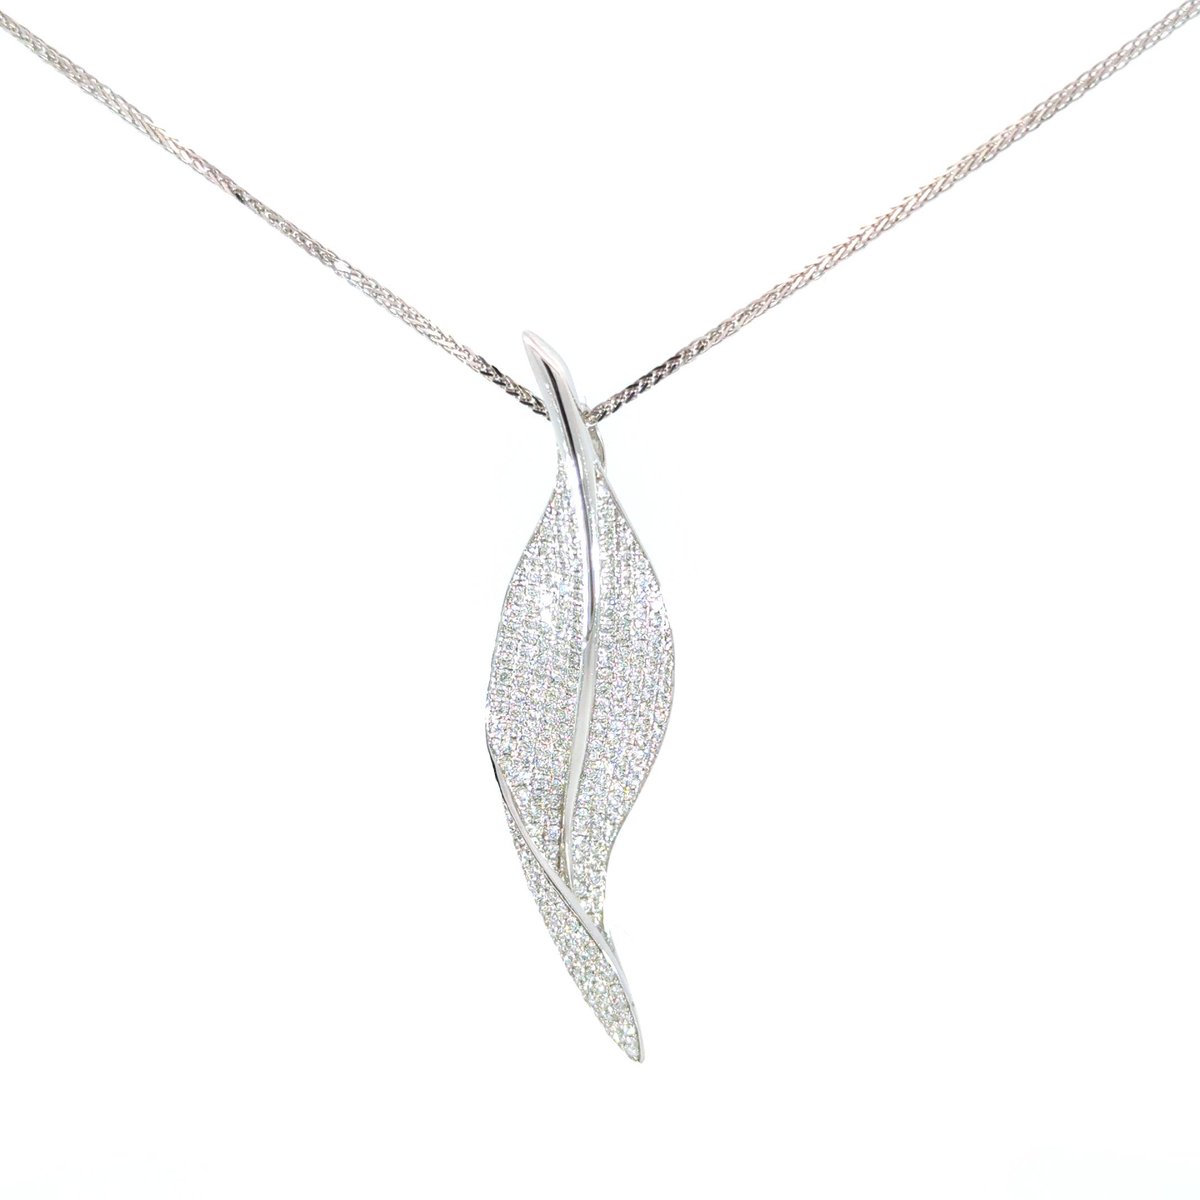 We're back open today and wanted to share this magnificent Diamond leaf pendant to kick of April's birthstone month.

1.10ct of sparkling 💎 are set into 18ct white Gold, shaped into this twisting leaf to sparkle from every angle.

#aprilbirthstone #diamond #diamondpendant #SBS